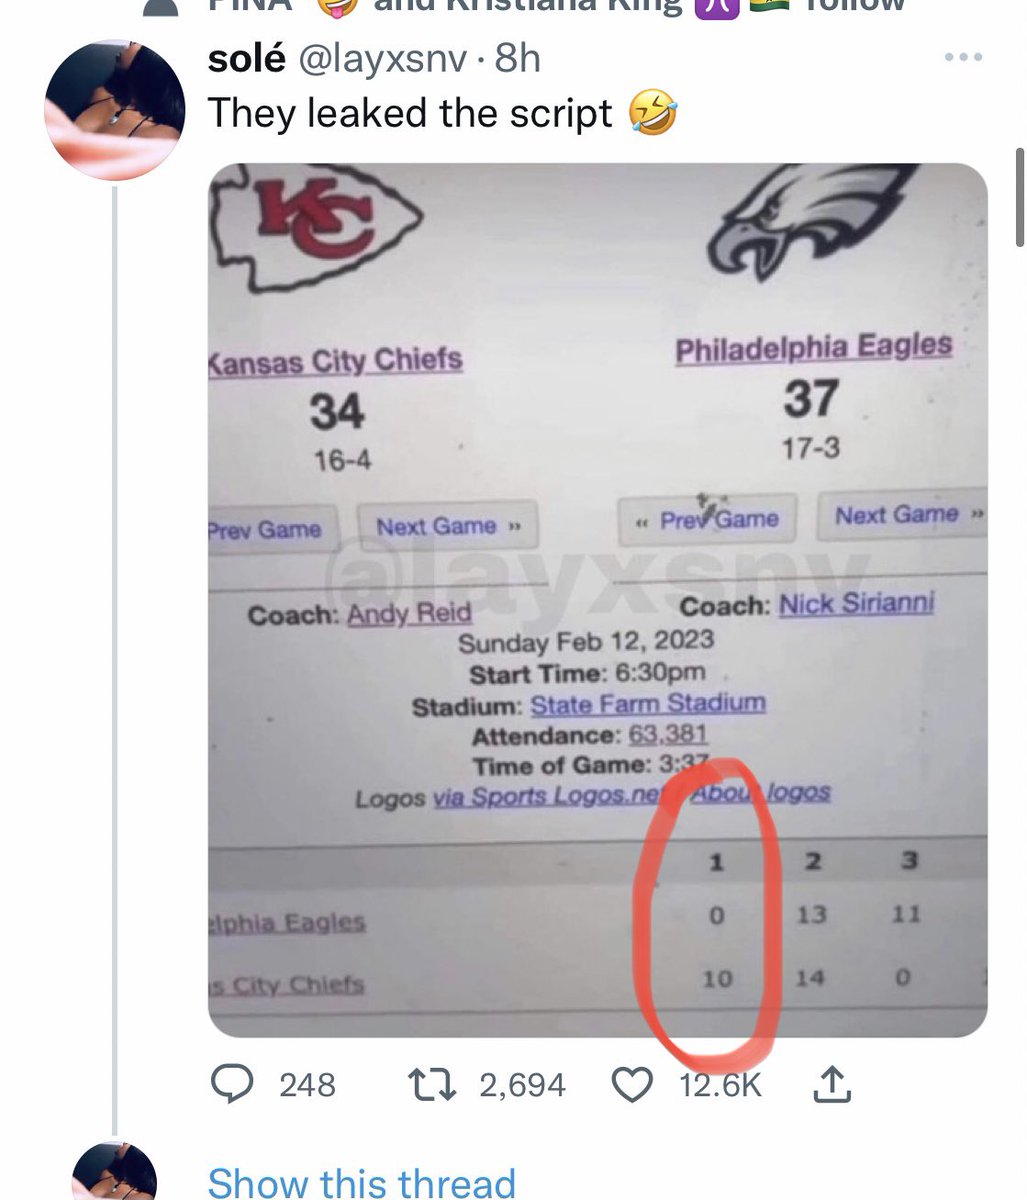 Jerry Truman on Twitter "I see the leaked script of the Super Bowl